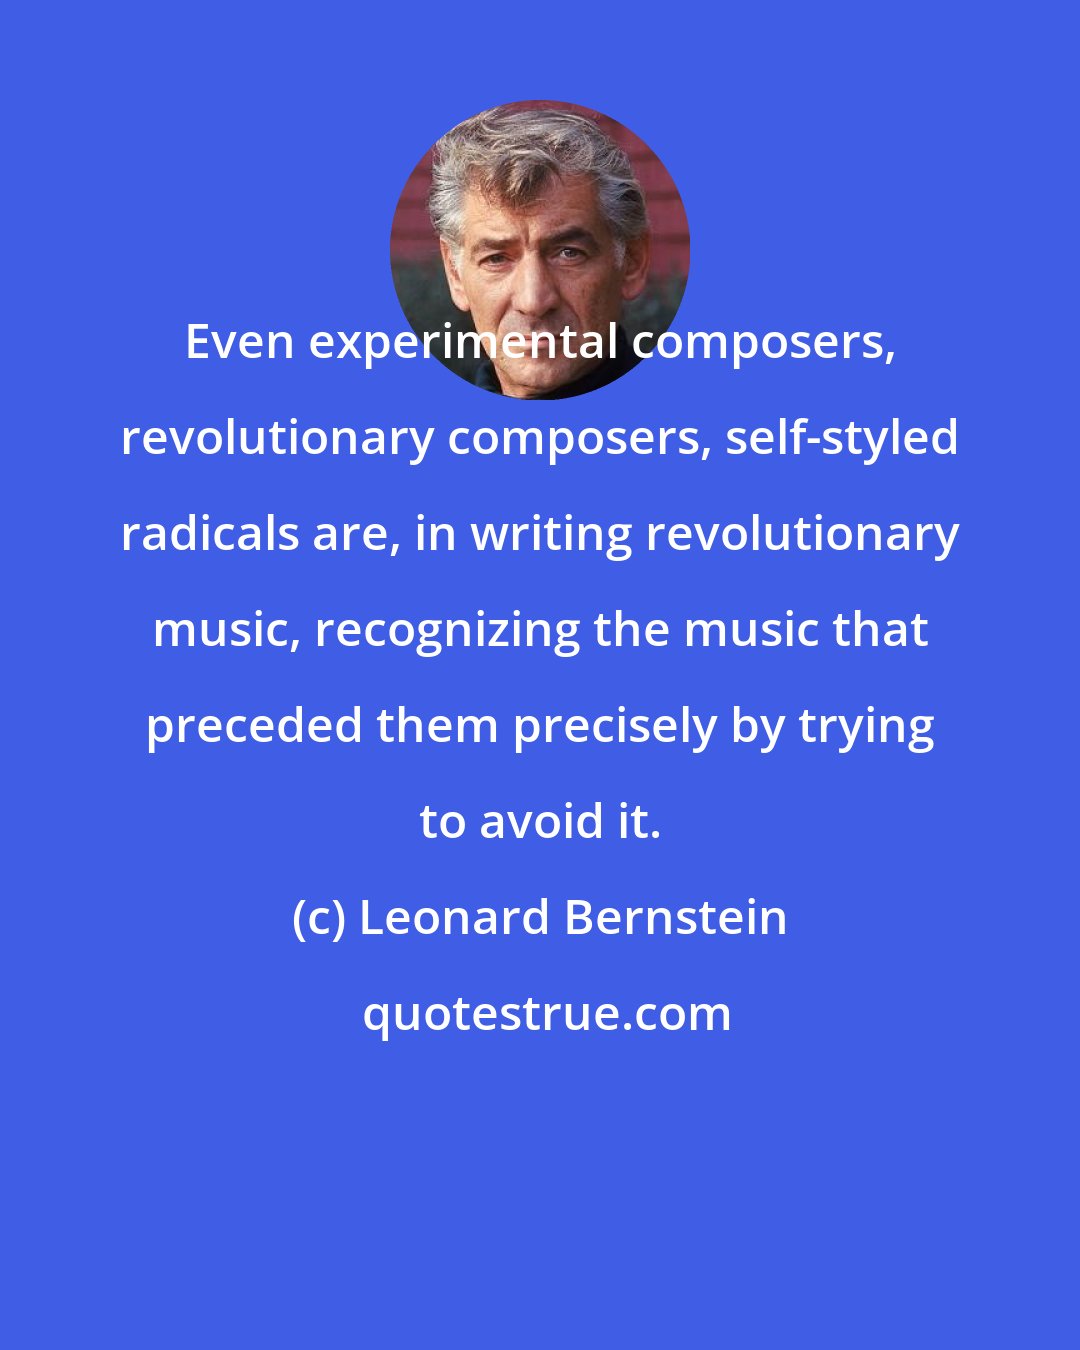 Leonard Bernstein: Even experimental composers, revolutionary composers, self-styled radicals are, in writing revolutionary music, recognizing the music that preceded them precisely by trying to avoid it.